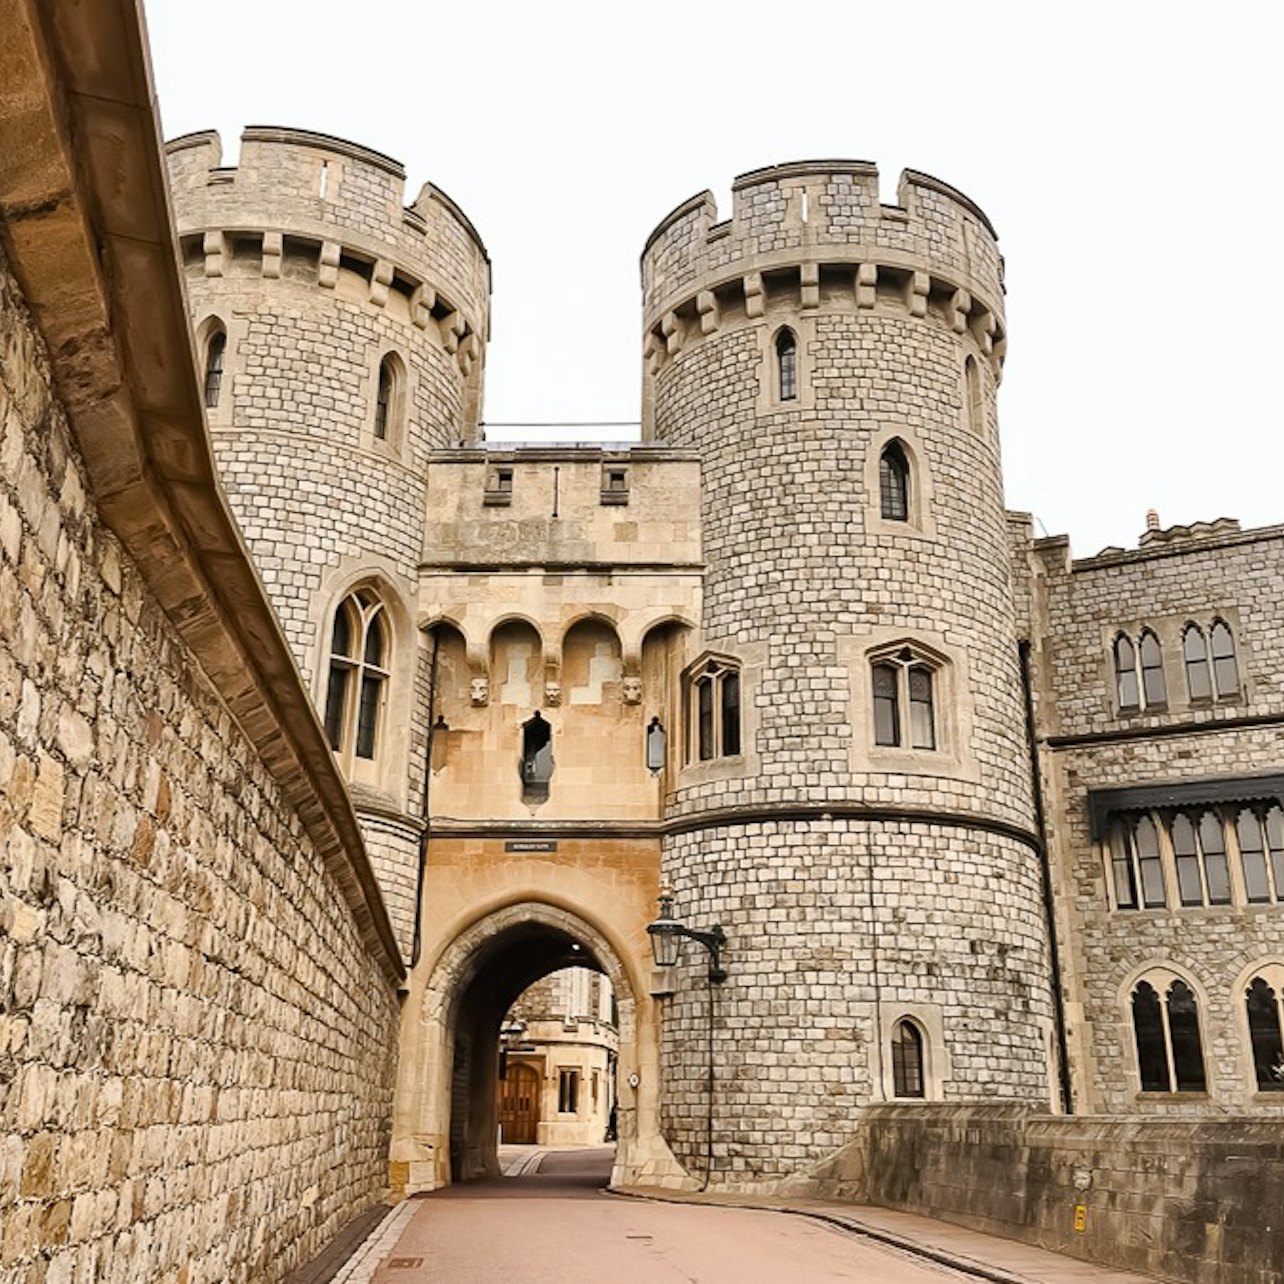 Windsor Castle: Half Day Trip from London including Entry - Accommodations in London